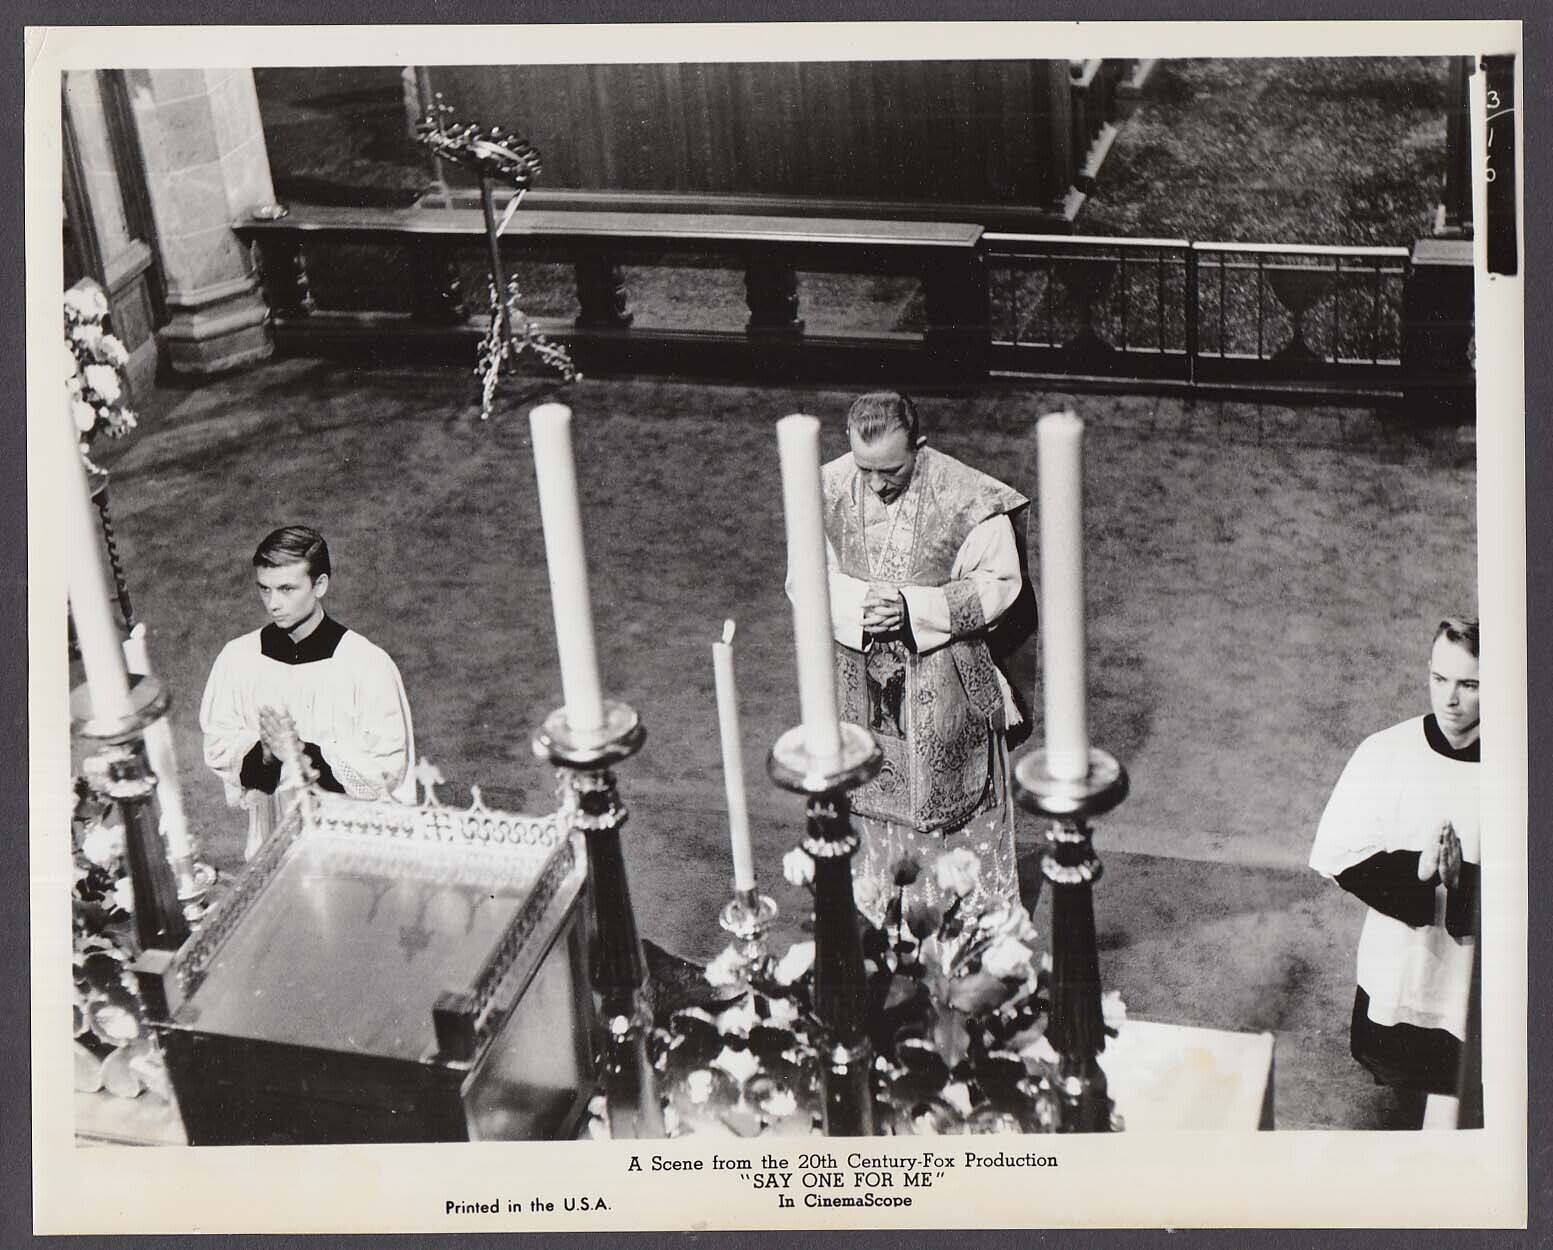 Bing Crosby praying in Say One For Me 8x10 photo 1959